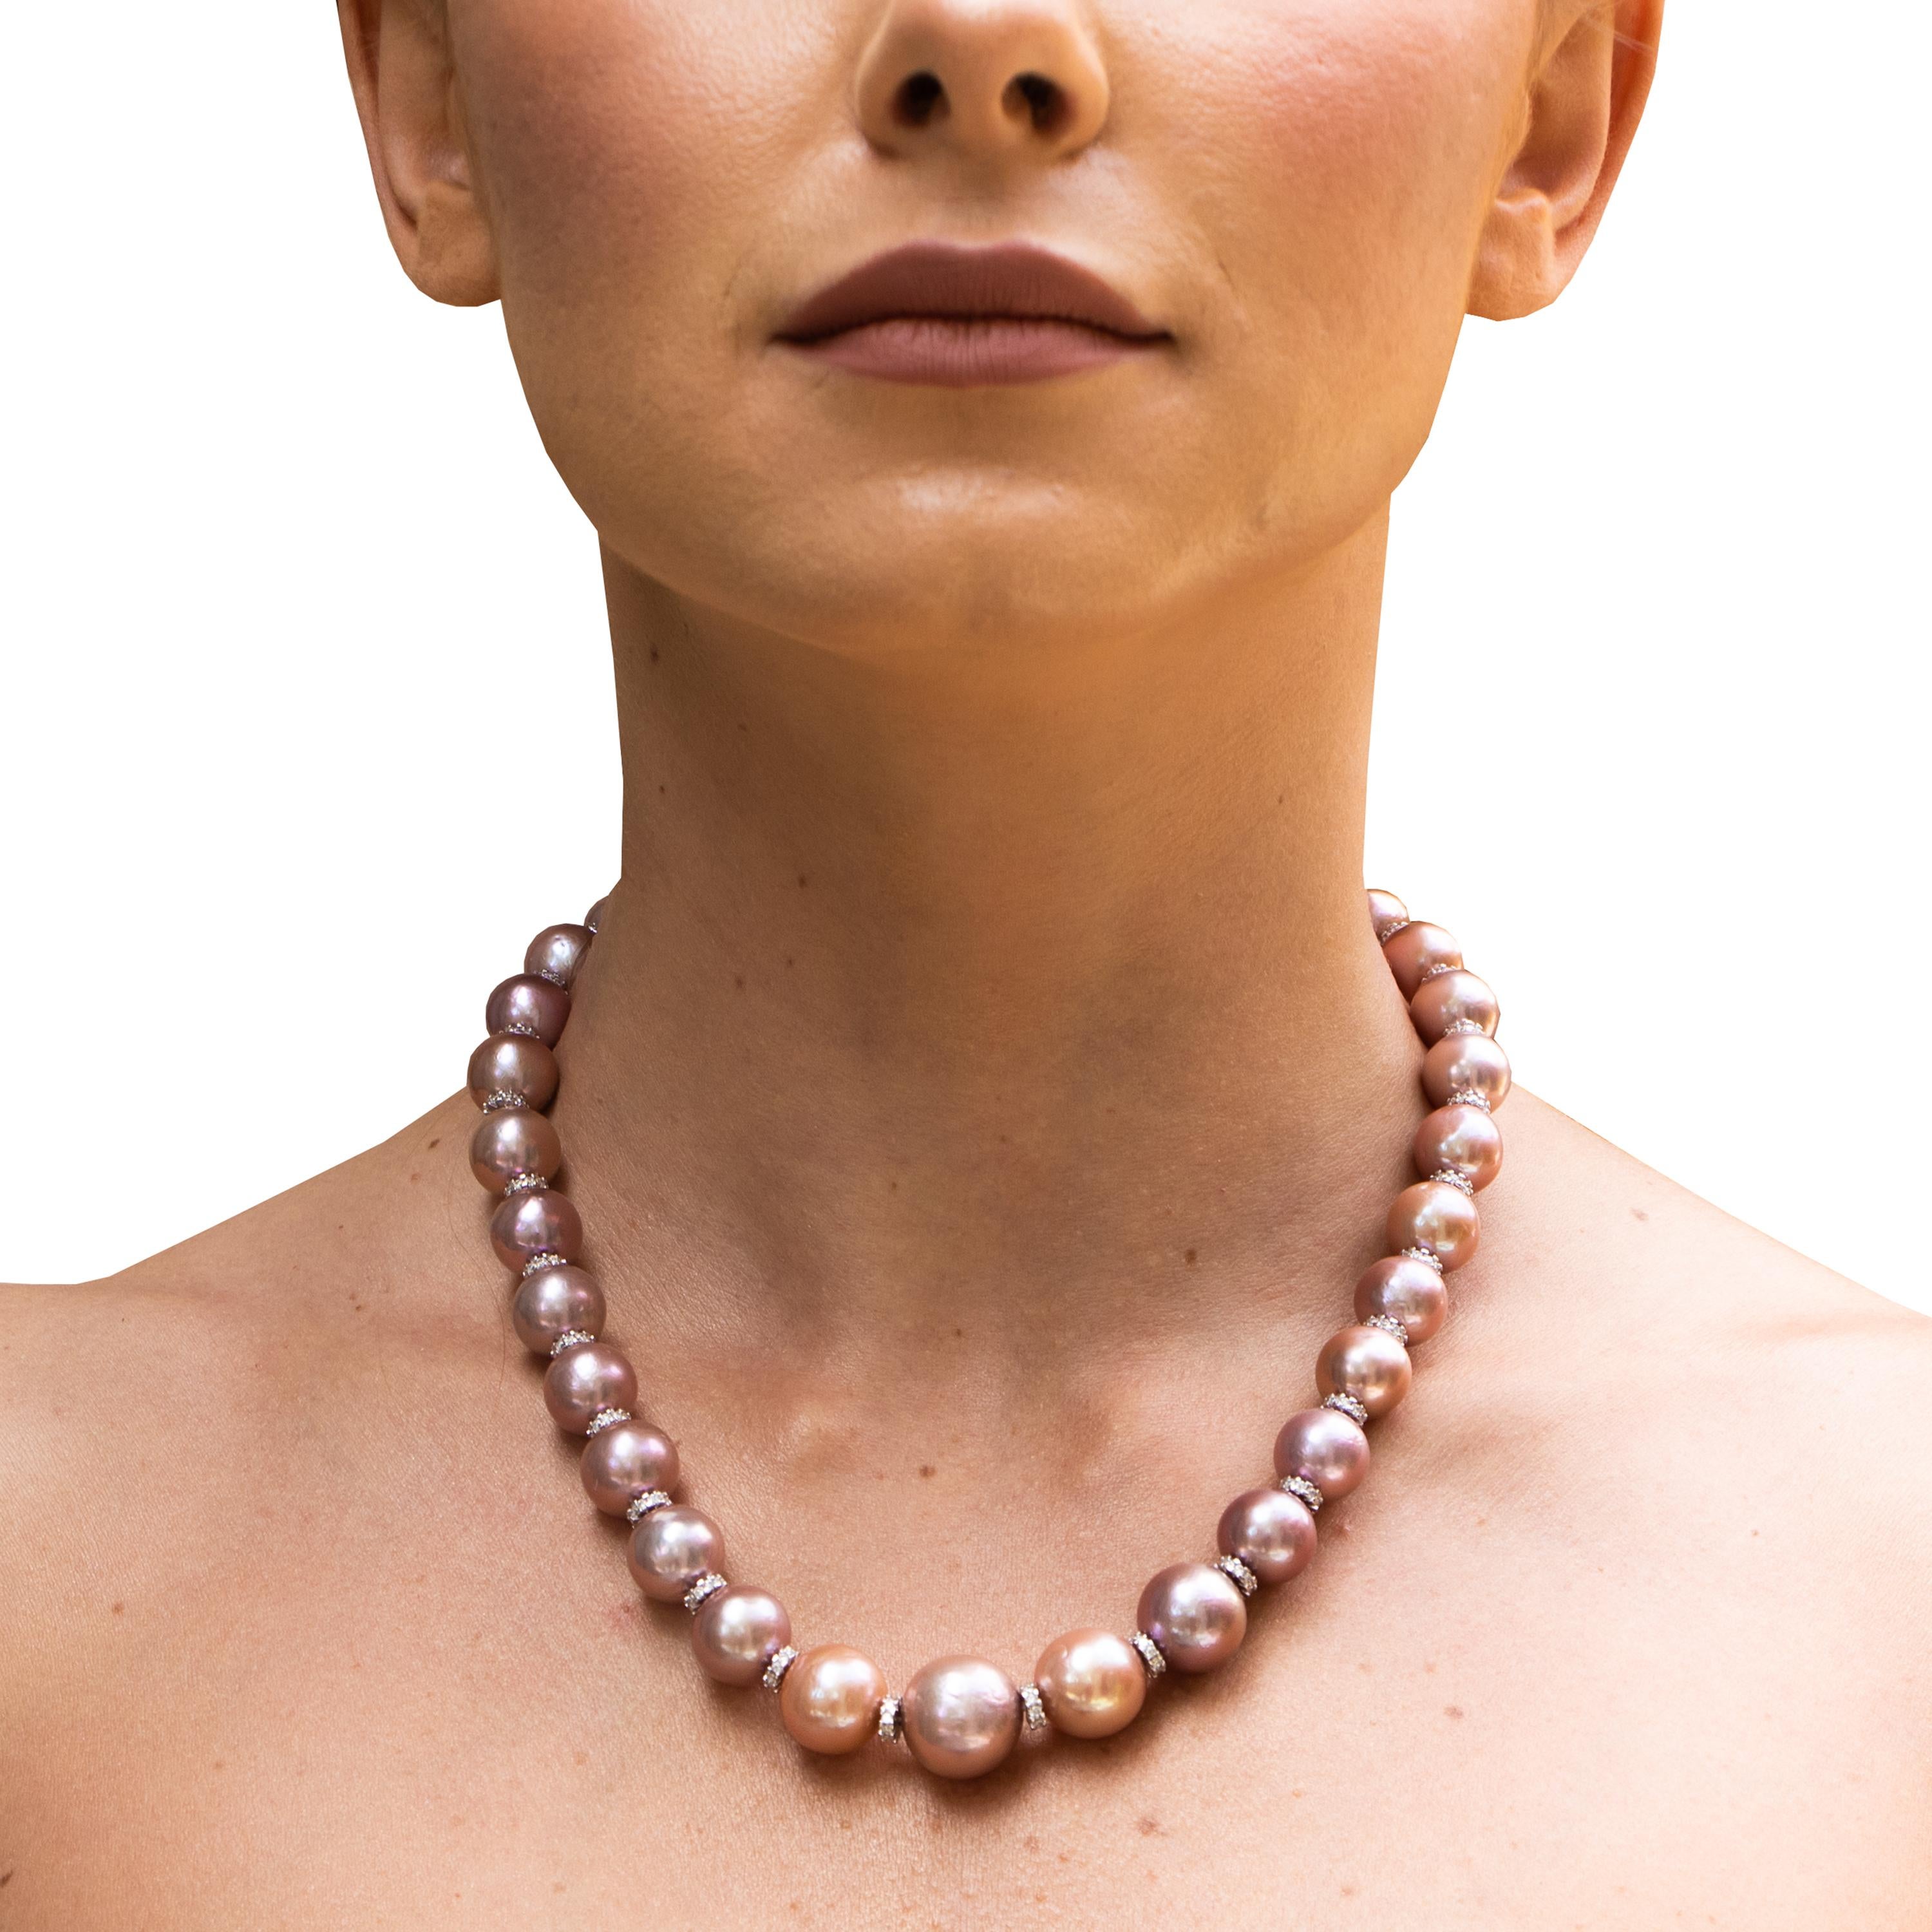 Stunning pink pearl necklace with diamond rondelles and a beautiful clasp. It's an easy show stopper. 
Very Fine Pink Pearls = 11-16mm
Length = 19 Inches